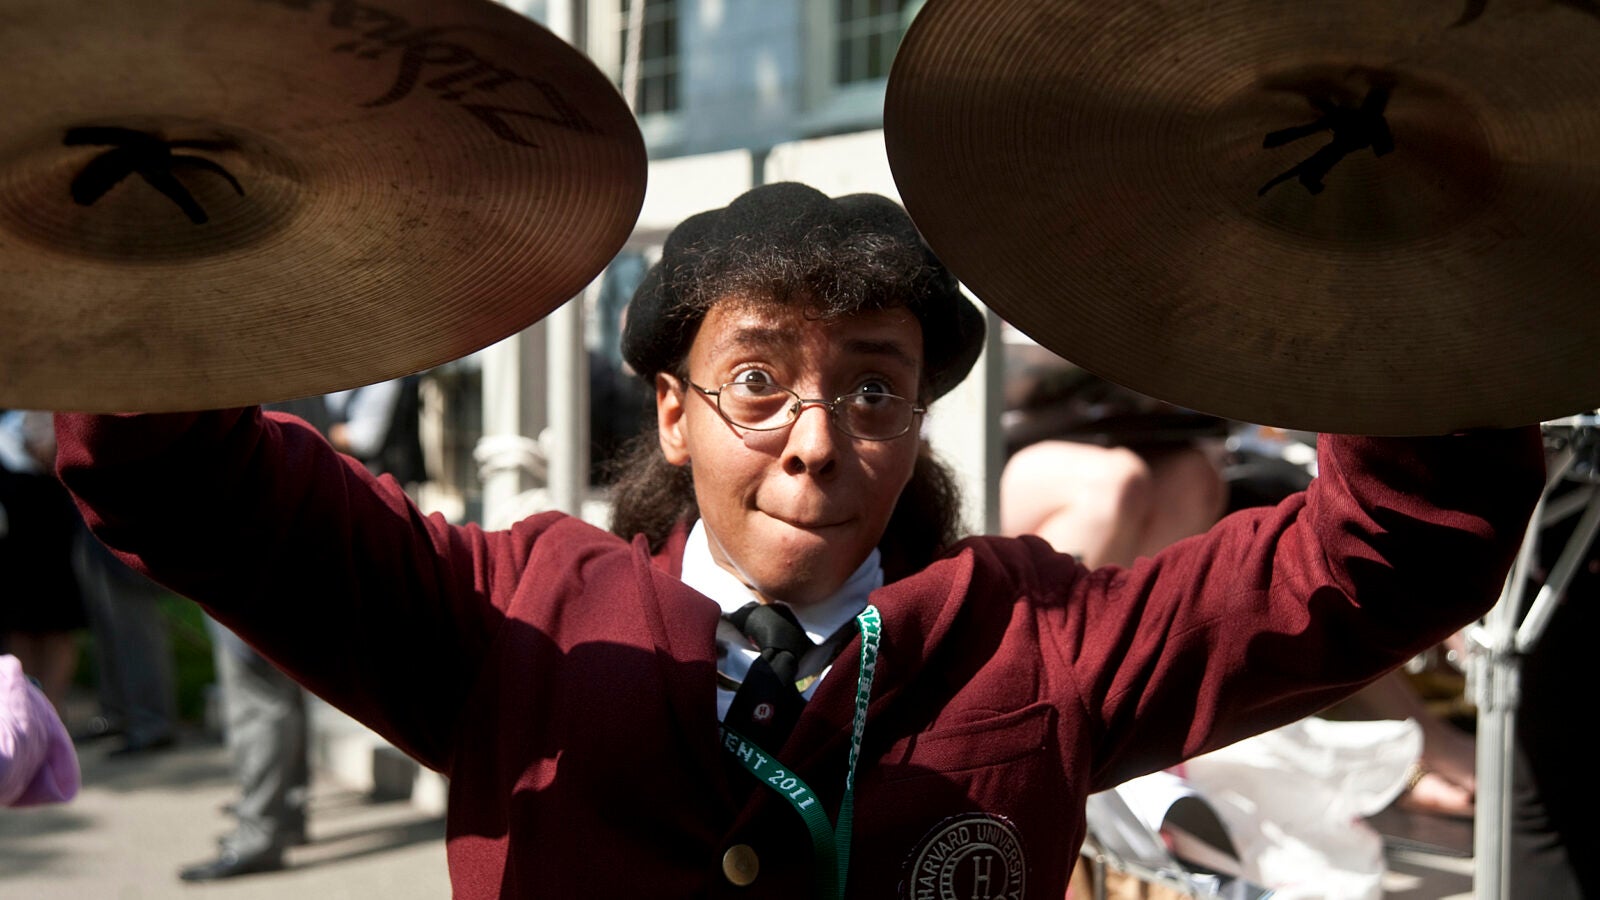 Latonya Wright playing cymbals for the Harvard Band in 2011.